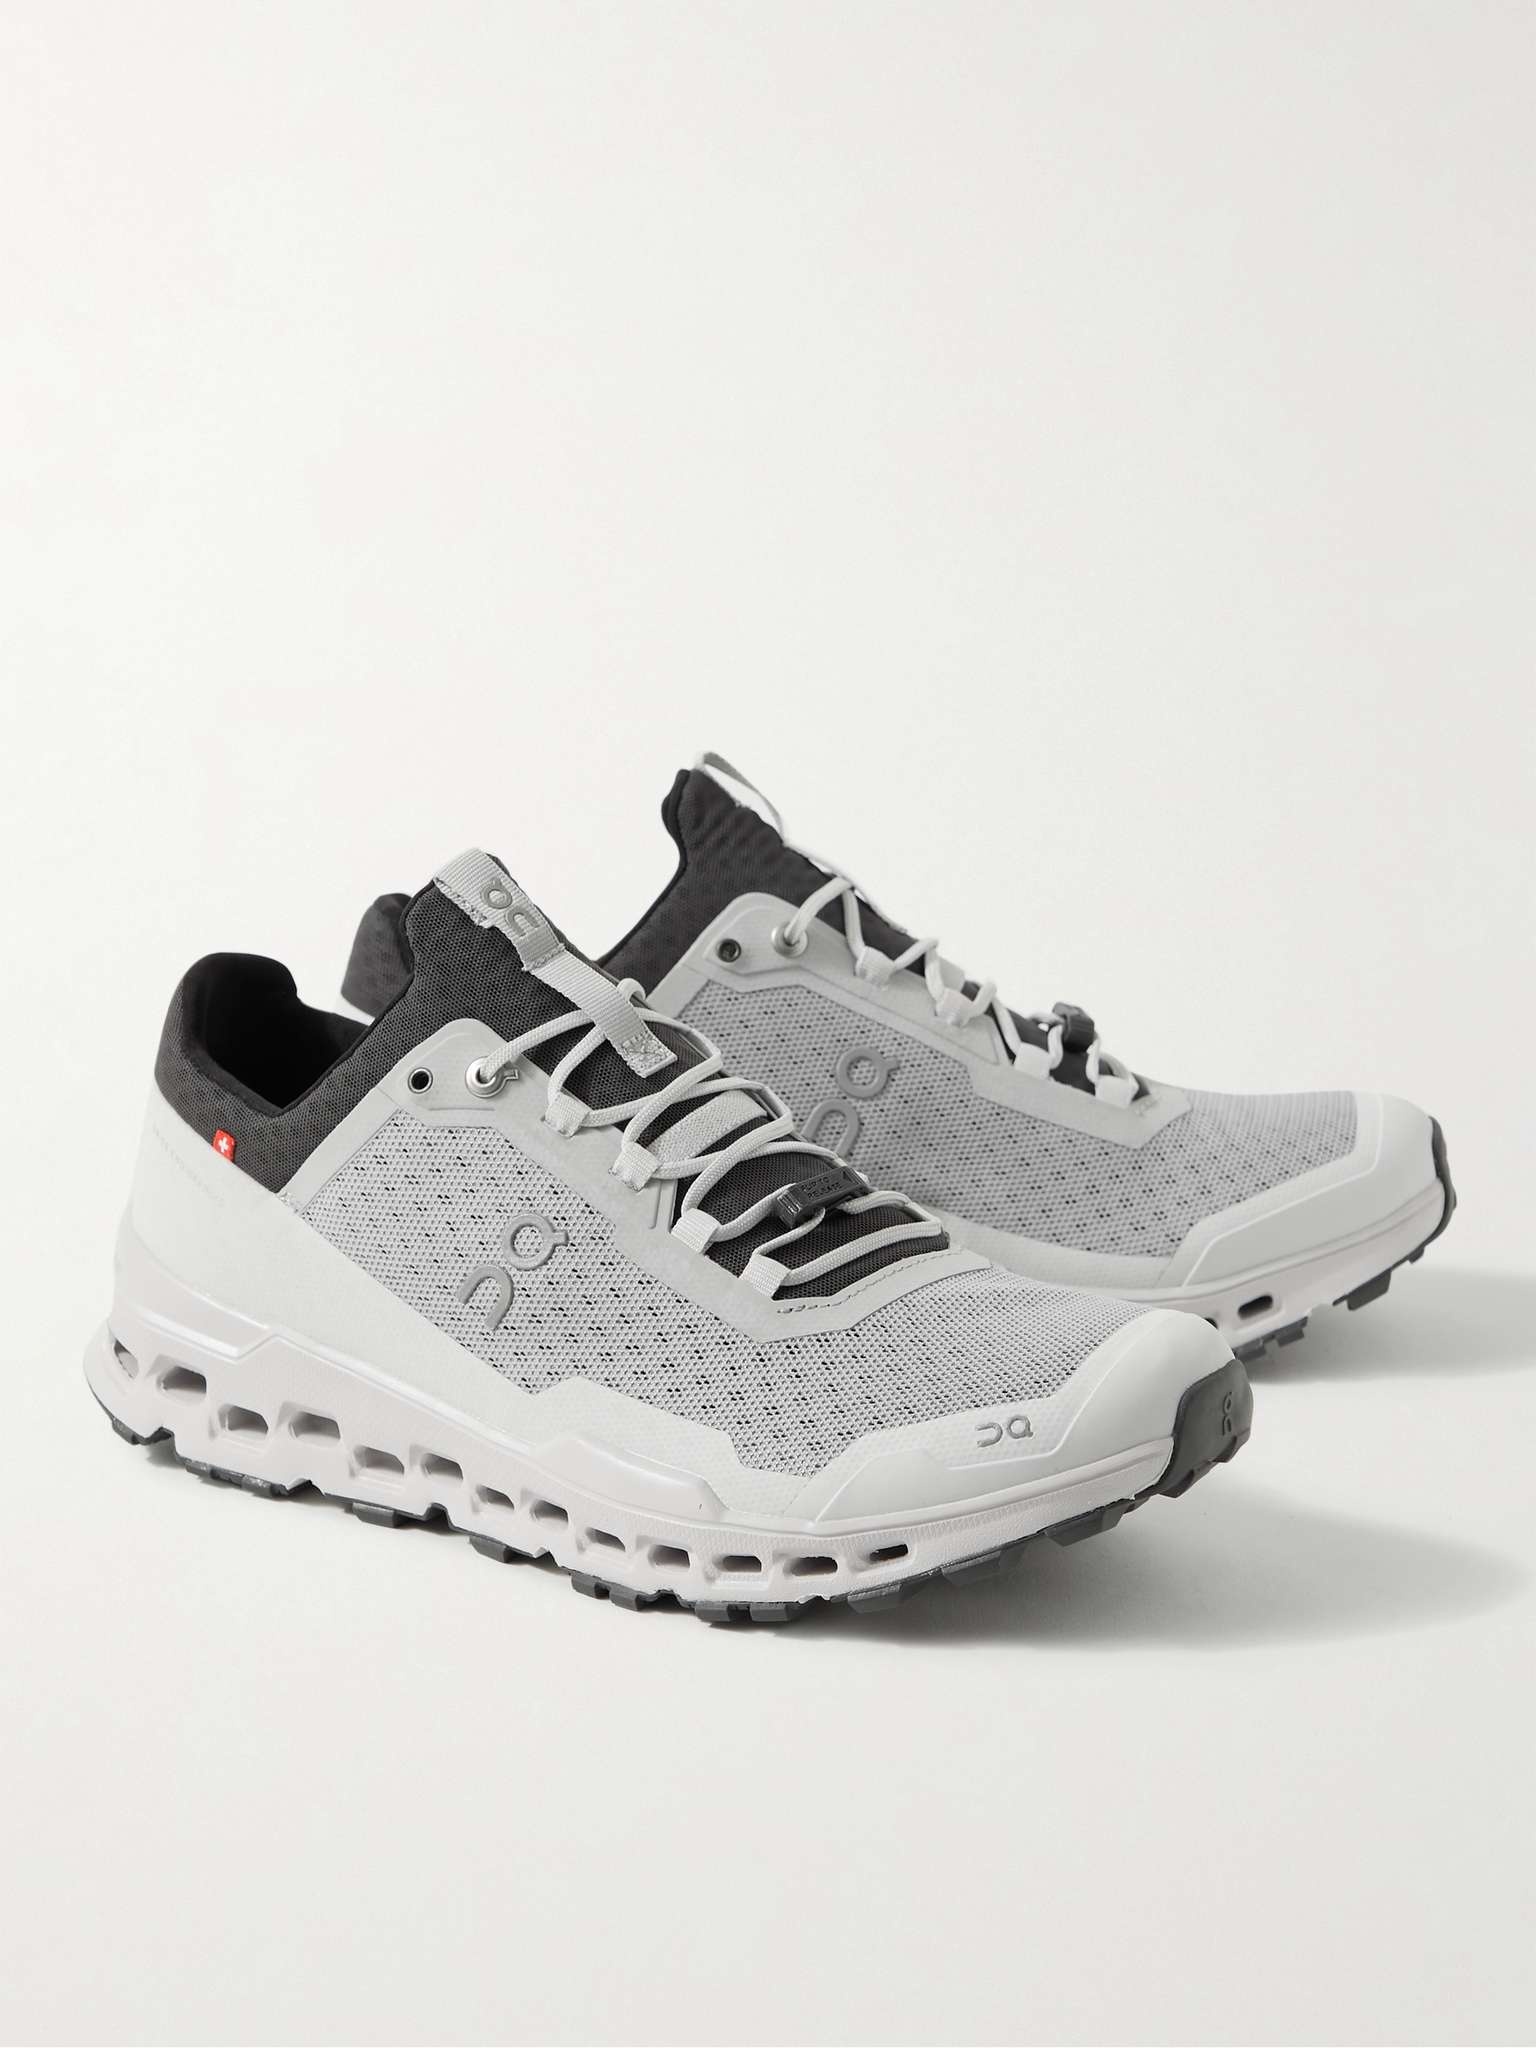 Cloudultra Rubber-Trimmed Mesh Trail Running Sneakers - 4